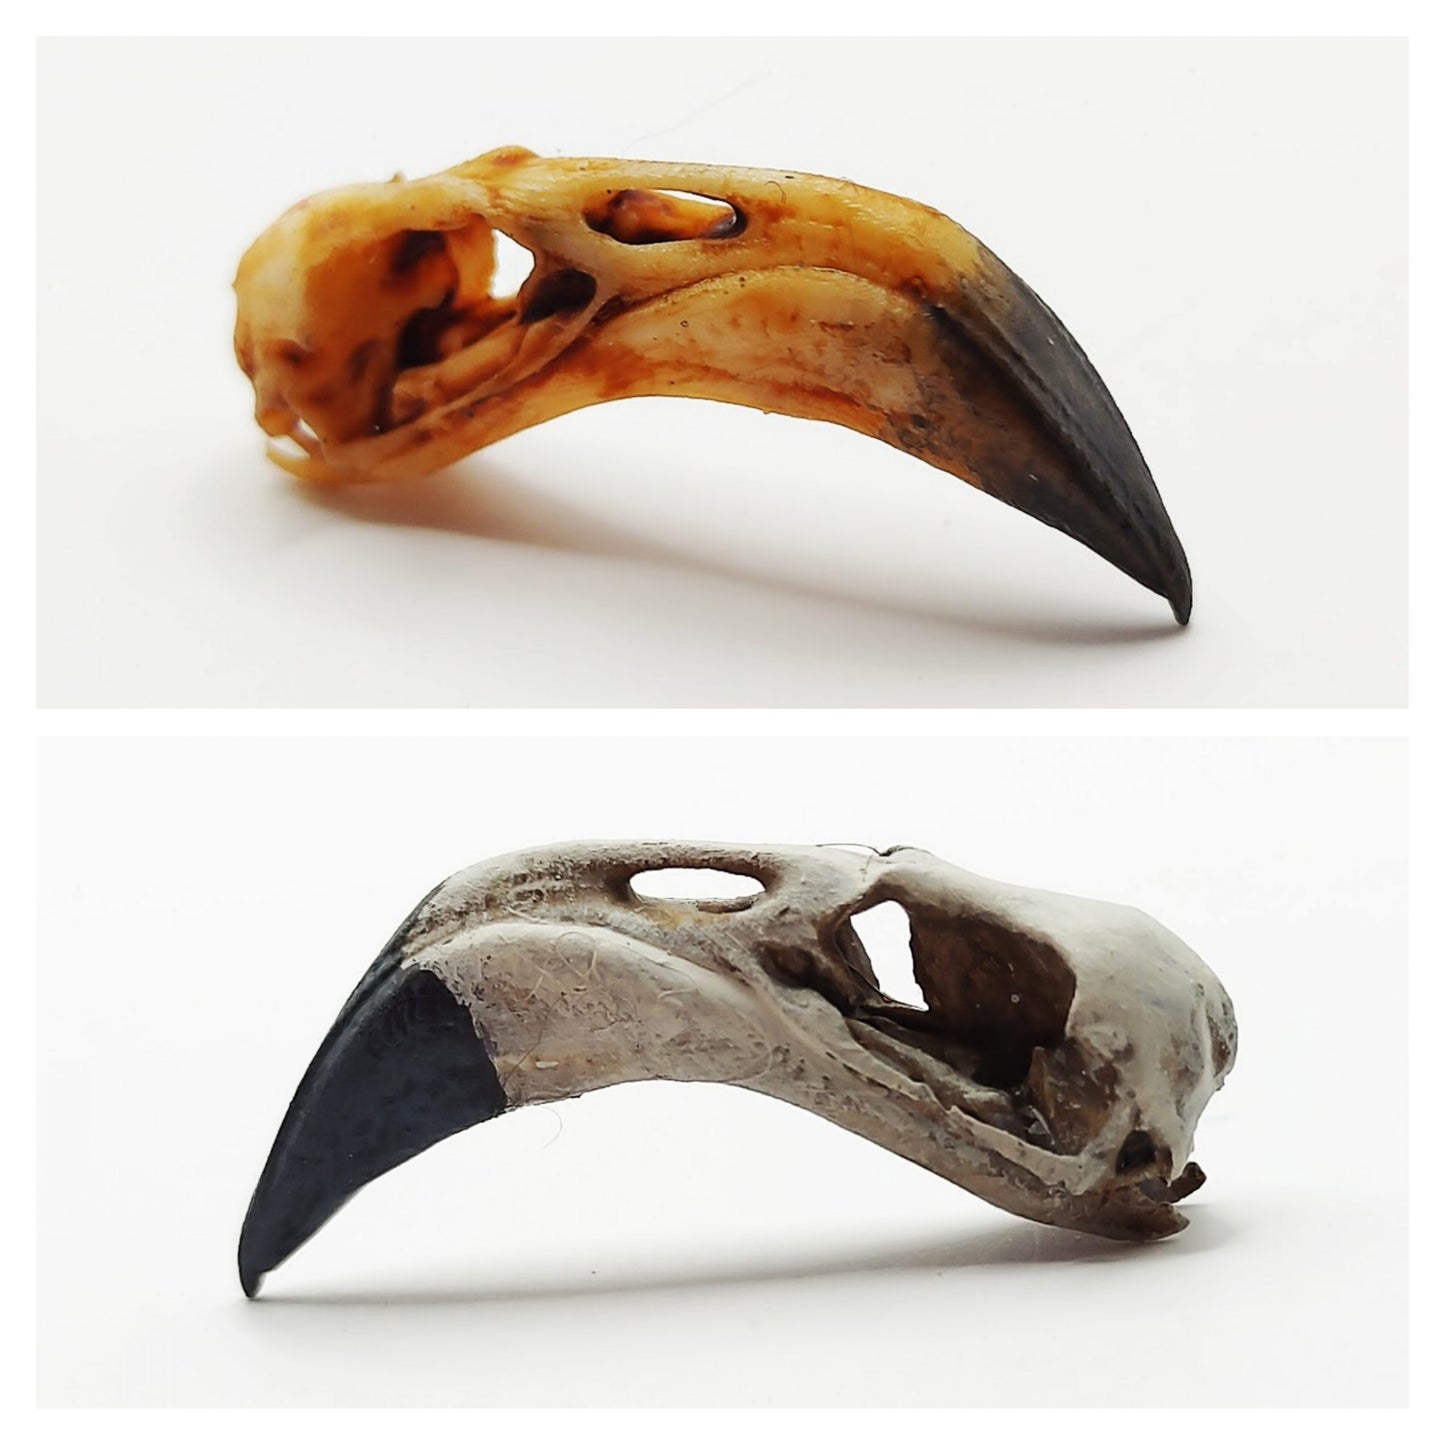 The image shows two flamingo skulls in both aged and bone.